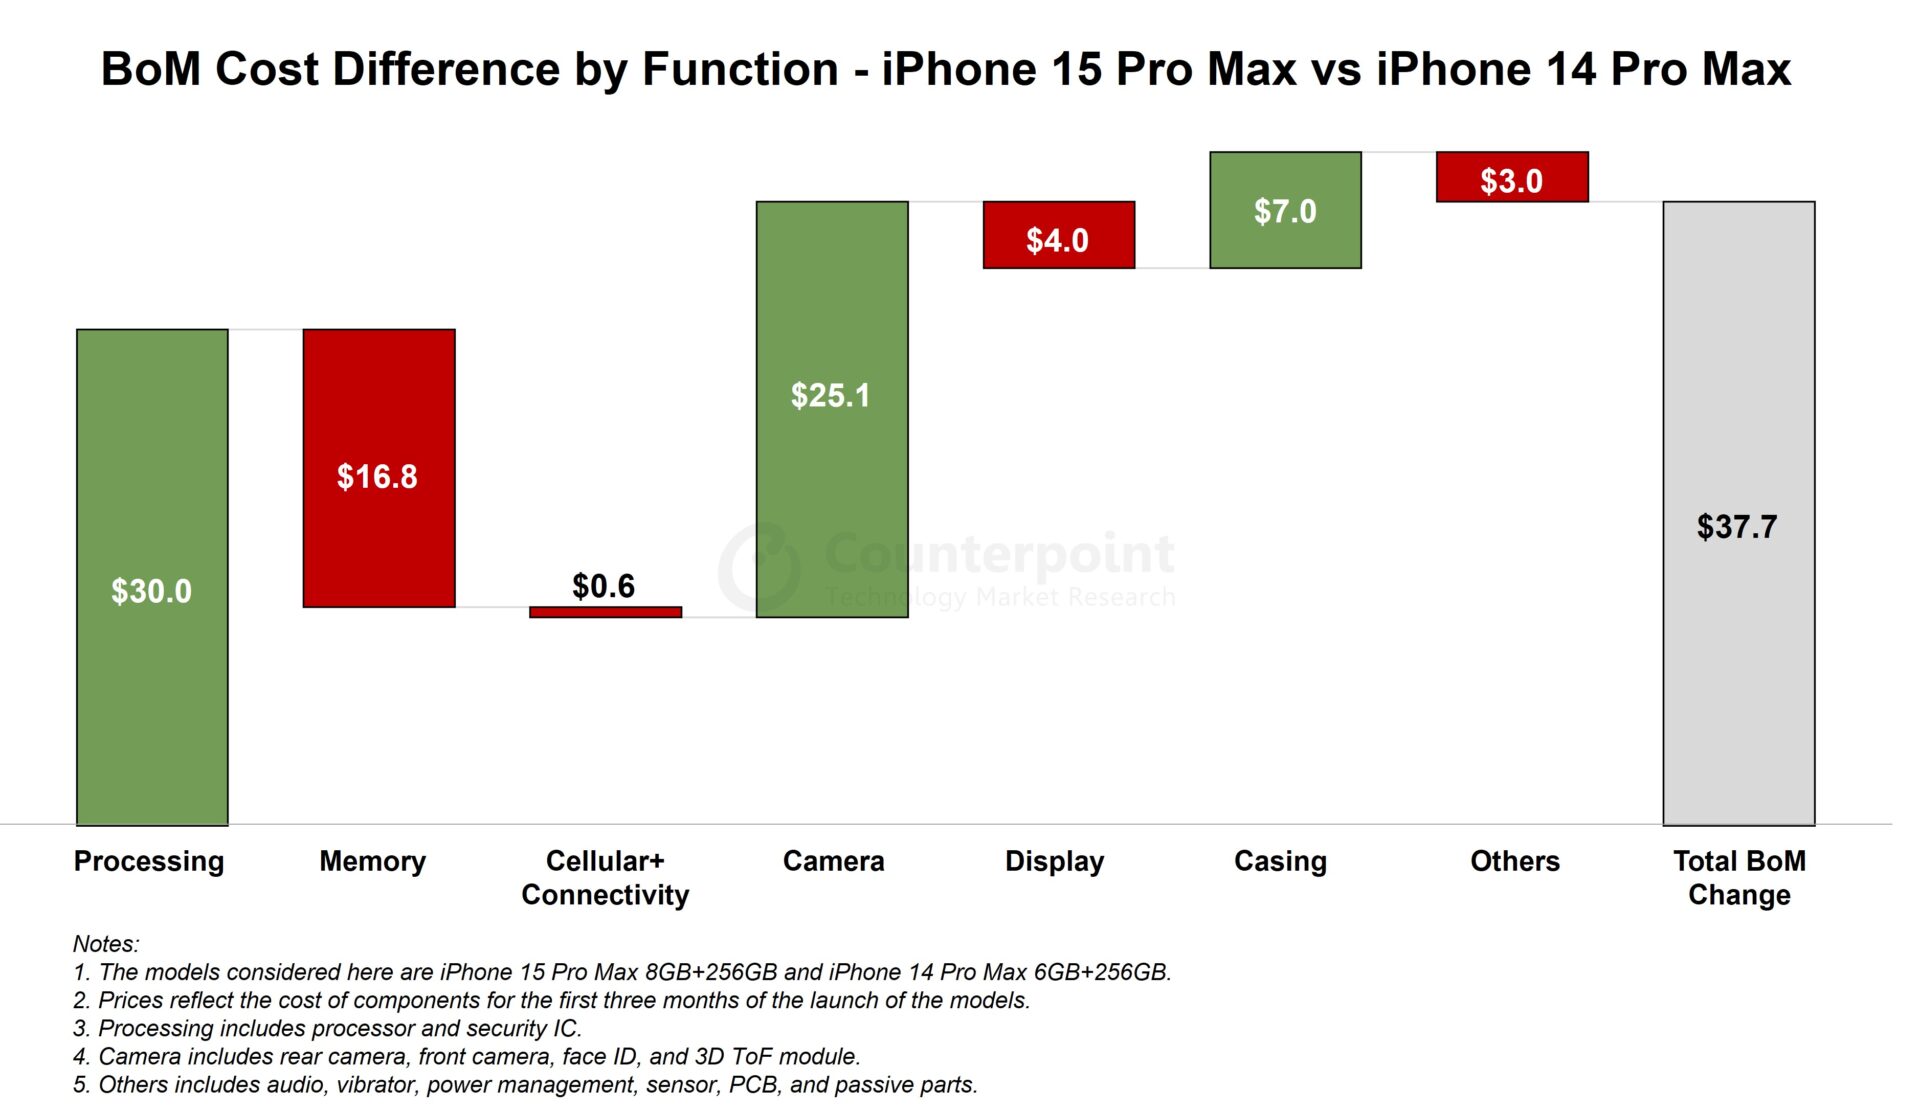 How Much It Costs Apple to Make an iPhone 14 Pro Max